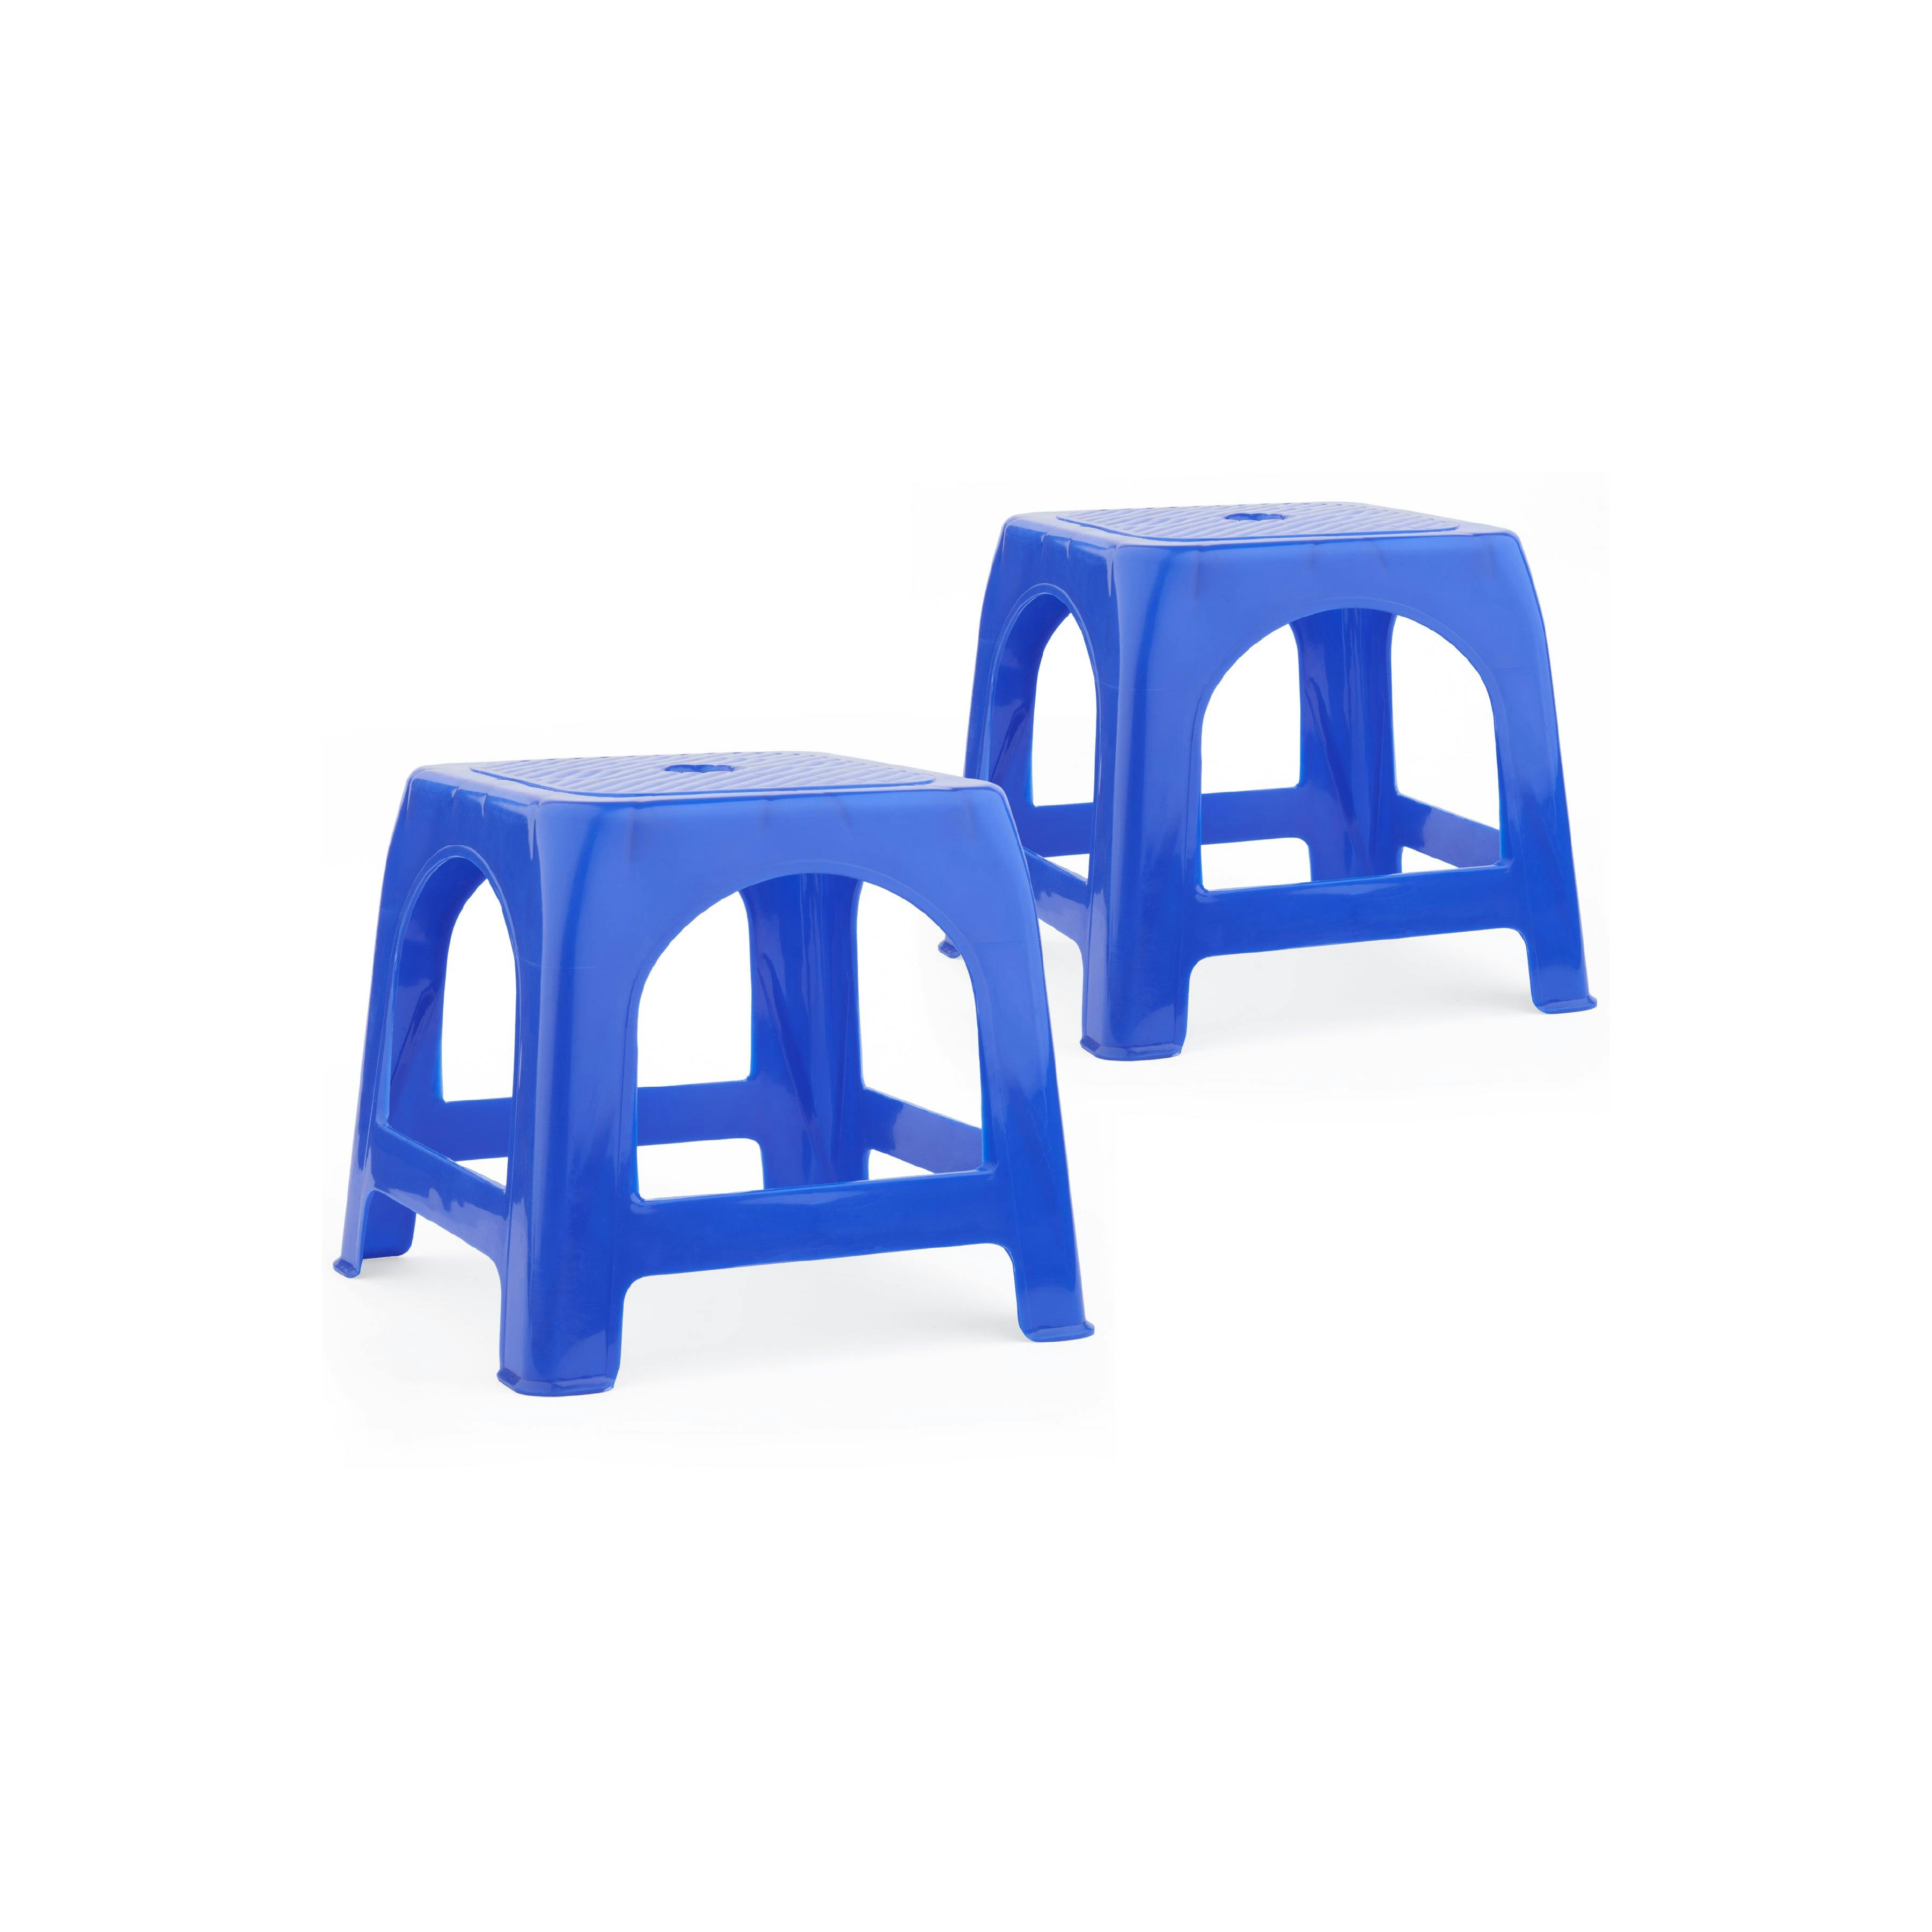 a set of blue stools = 1 of 6